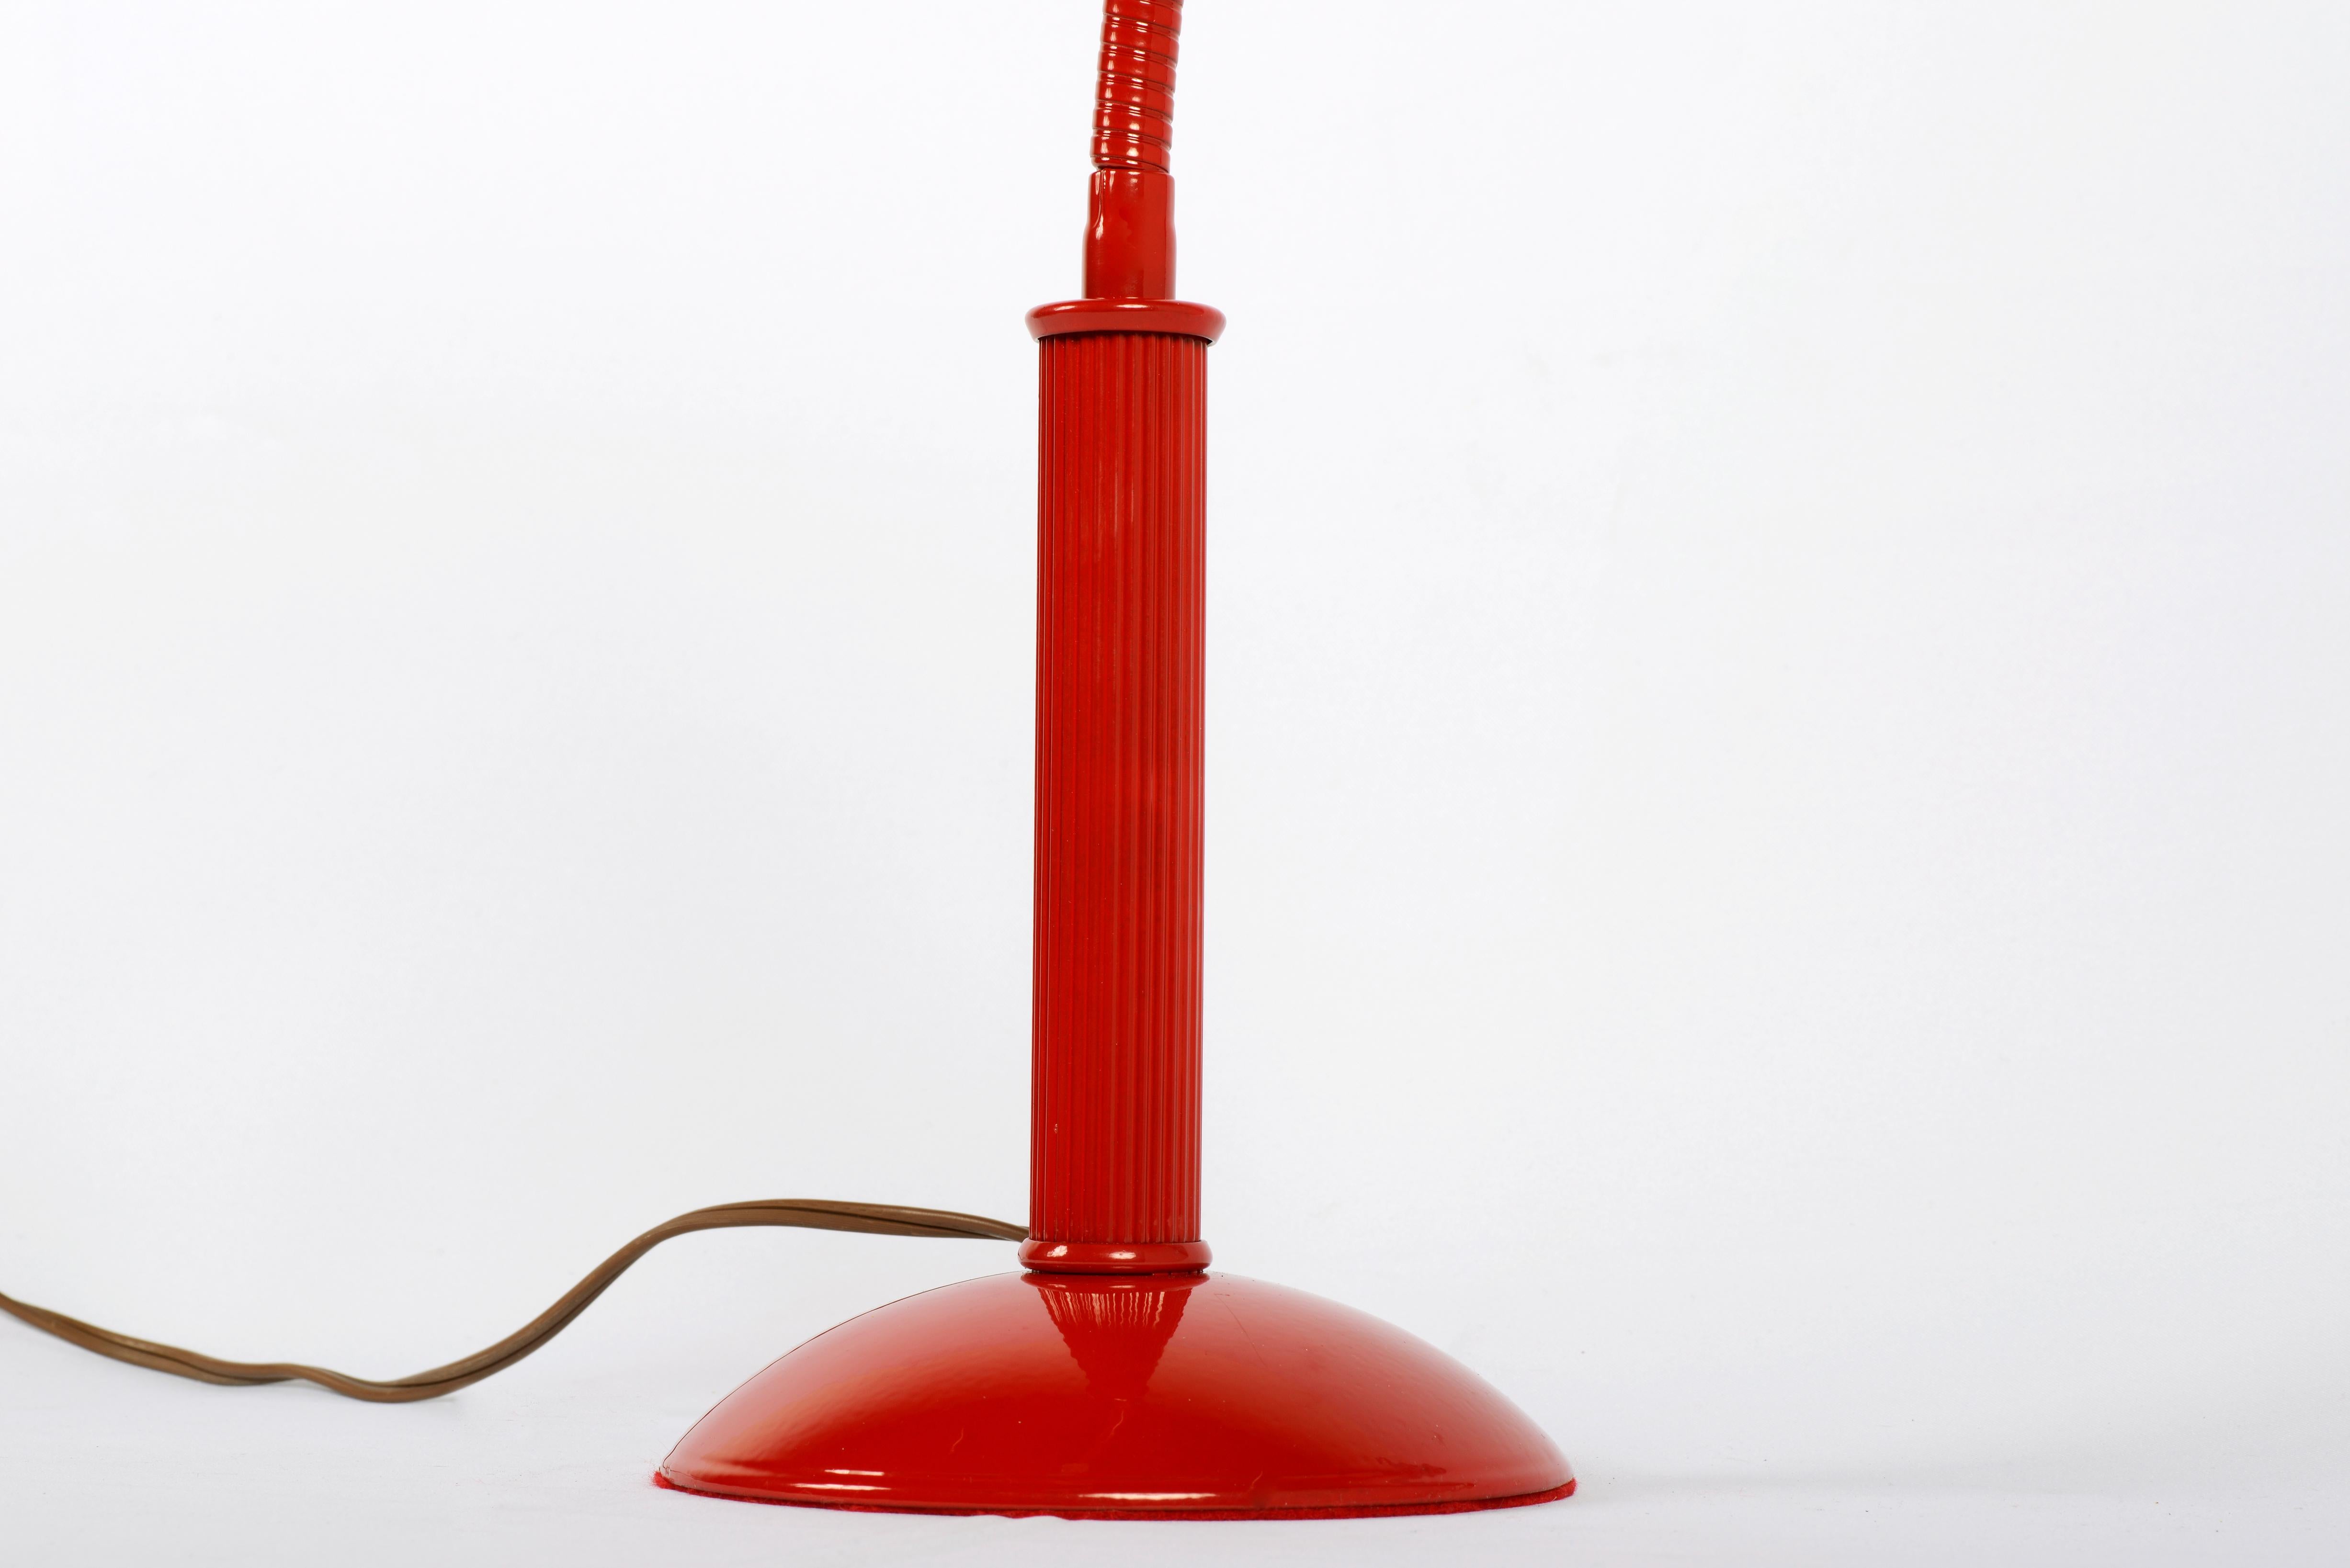 Mid-Century Modern 1960s Gooseneck Desk Lamp Refinished in Fire Engine Red